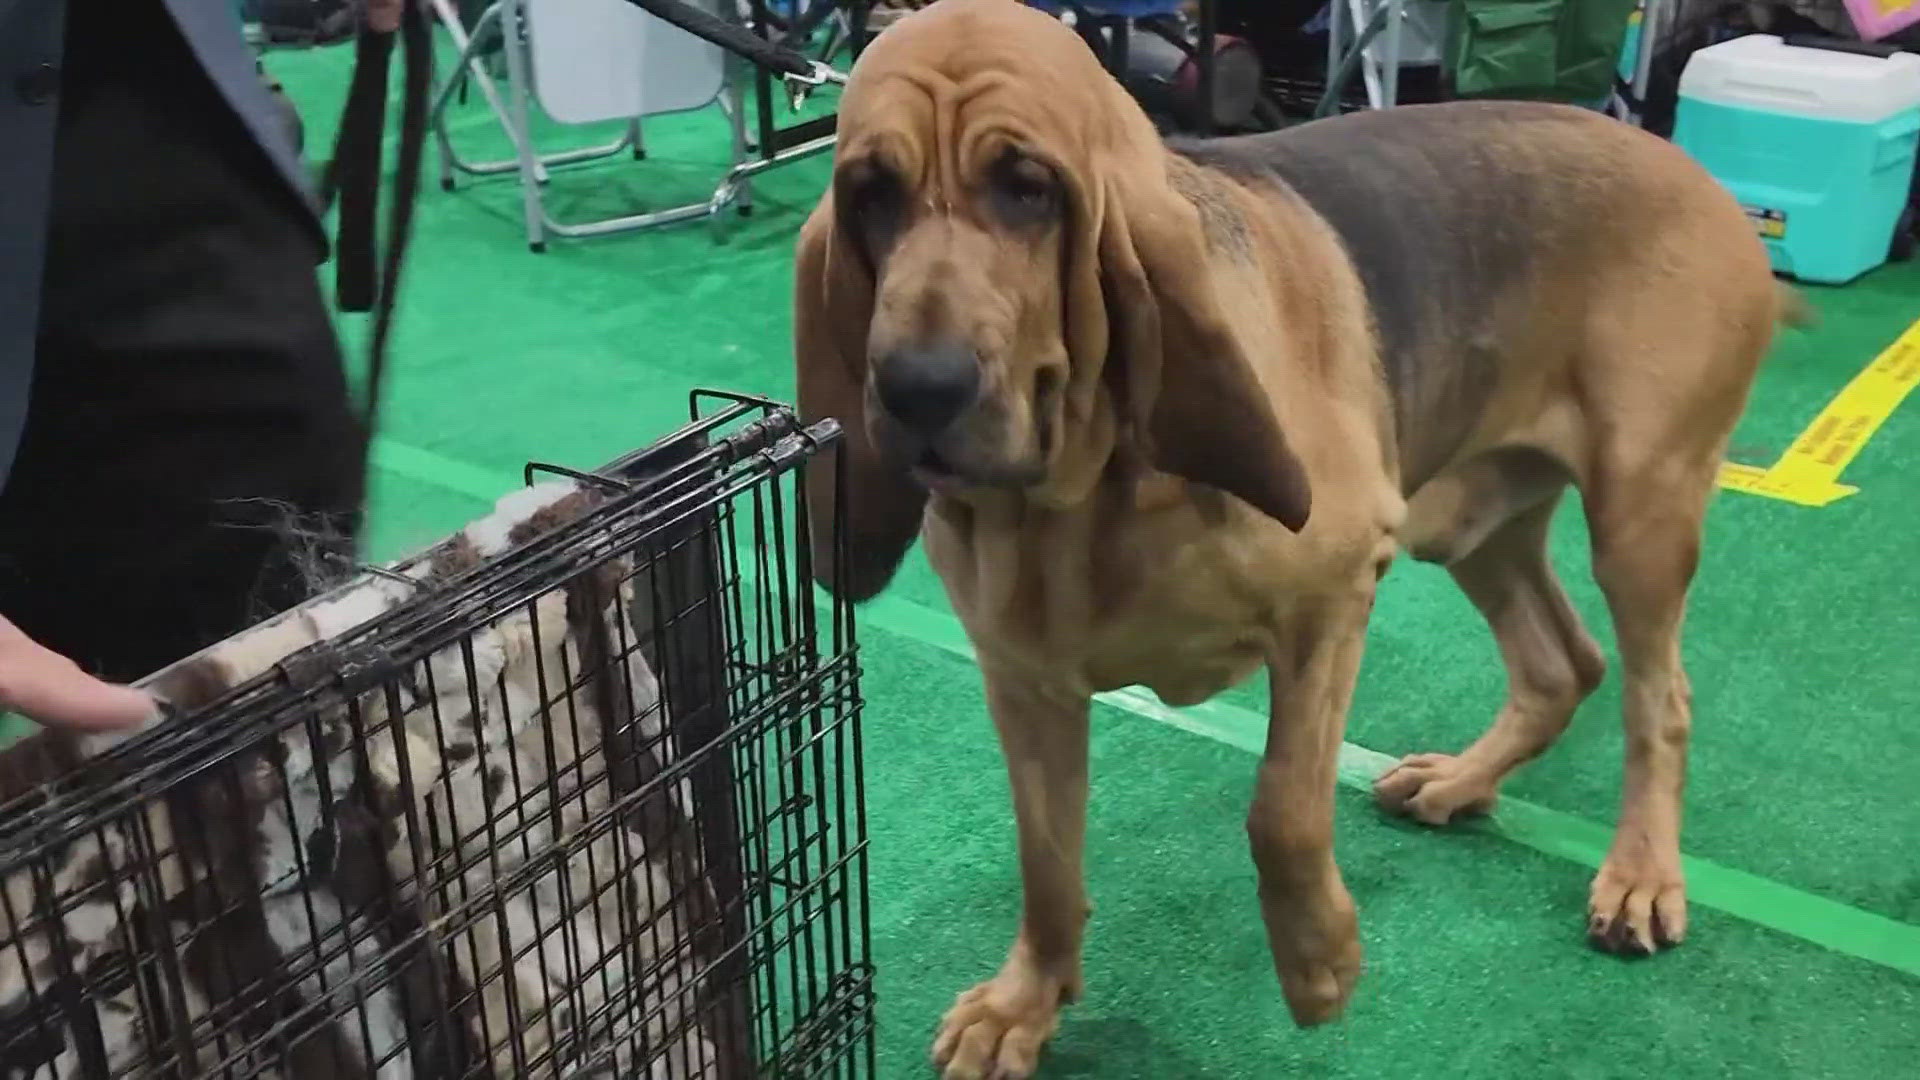 2,500 dogs are competing with 200 breeds spread across seven groups.